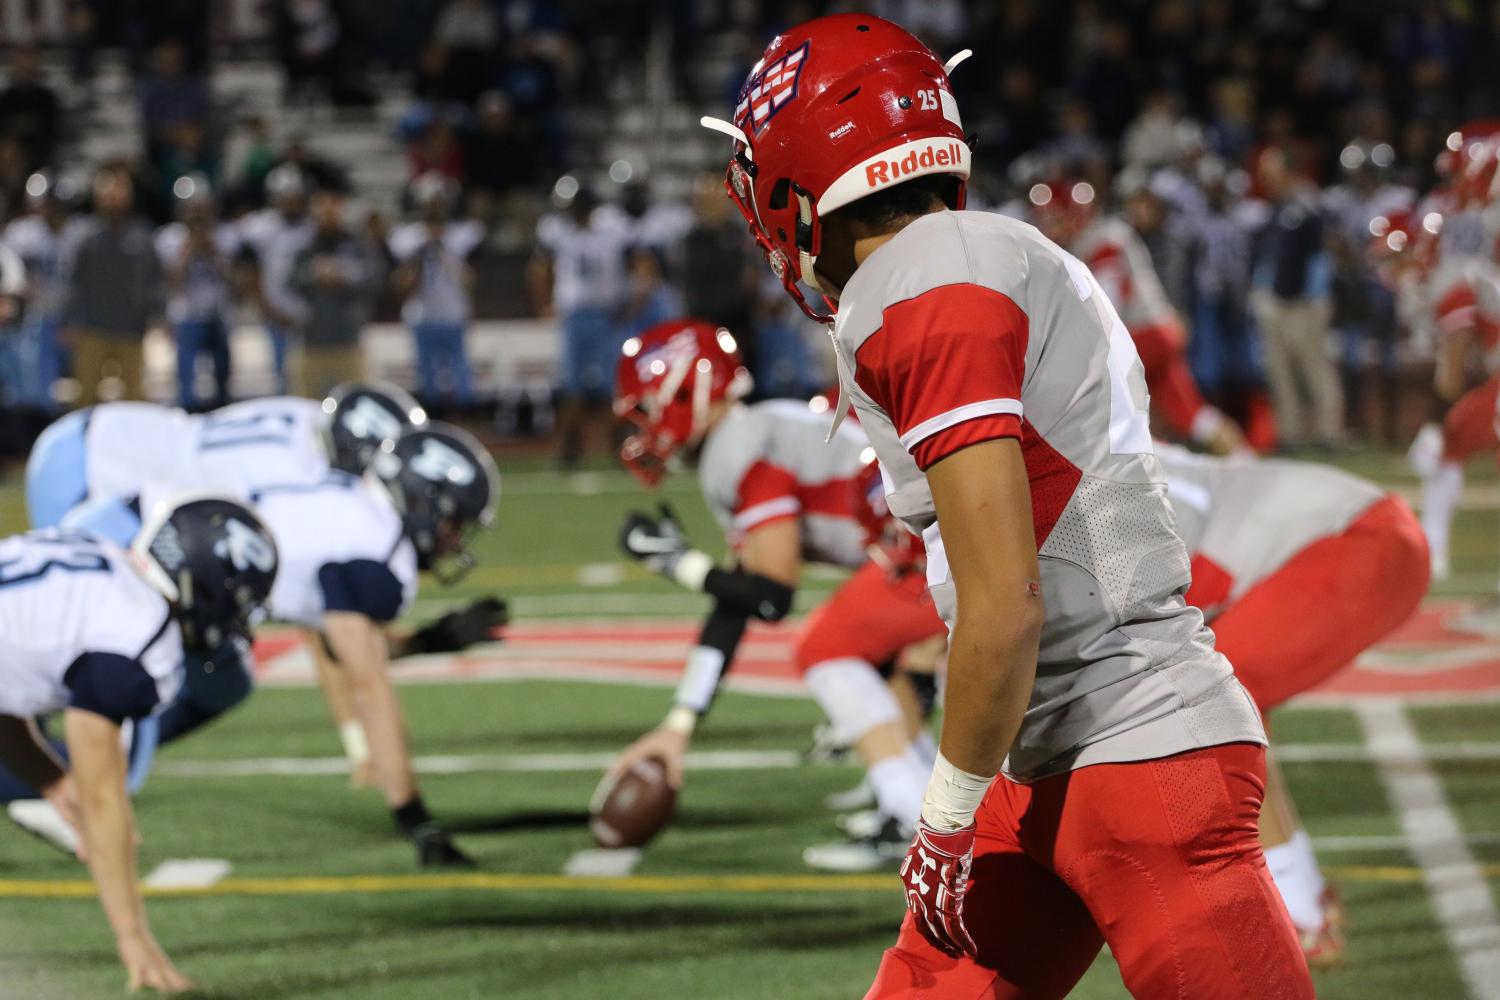 Niles West suffers another tough loss of 23-0 resulting in a record of 0-3. 